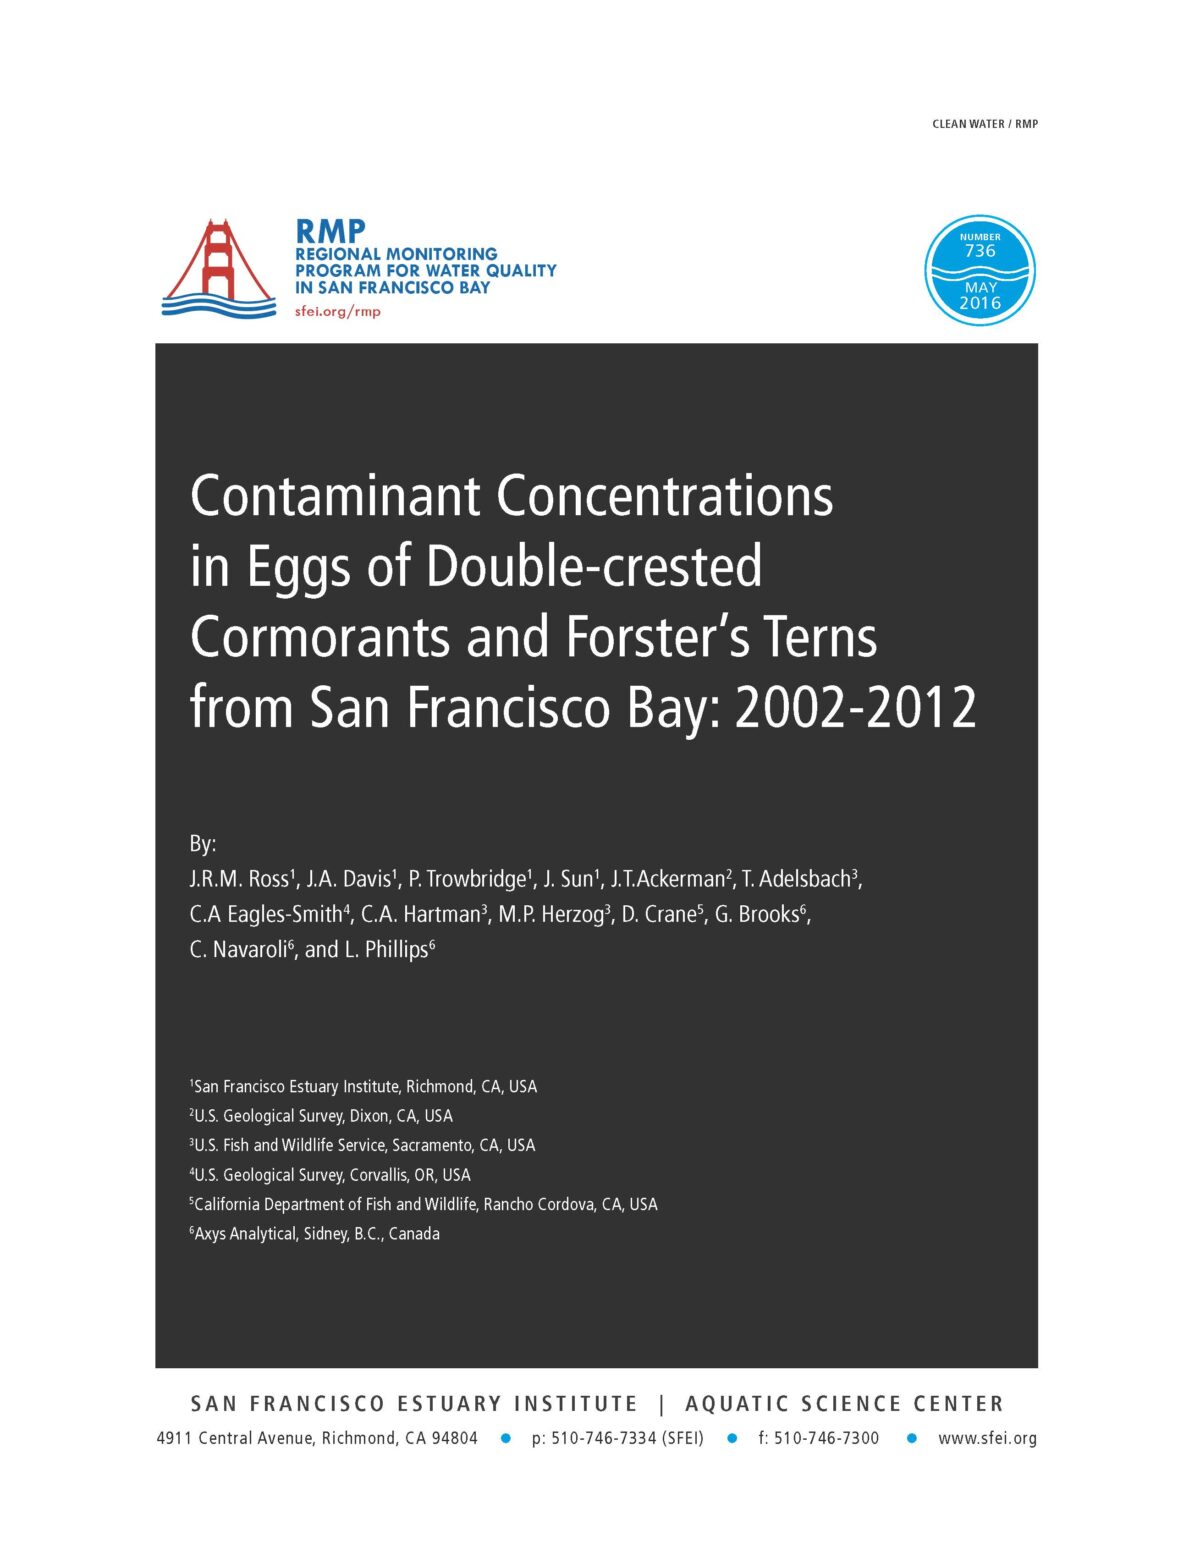 Contaminant Concentrations in Eggs of Double-crested Cormorants and Forster’s Terns from San Francisco Bay: 2002-2012